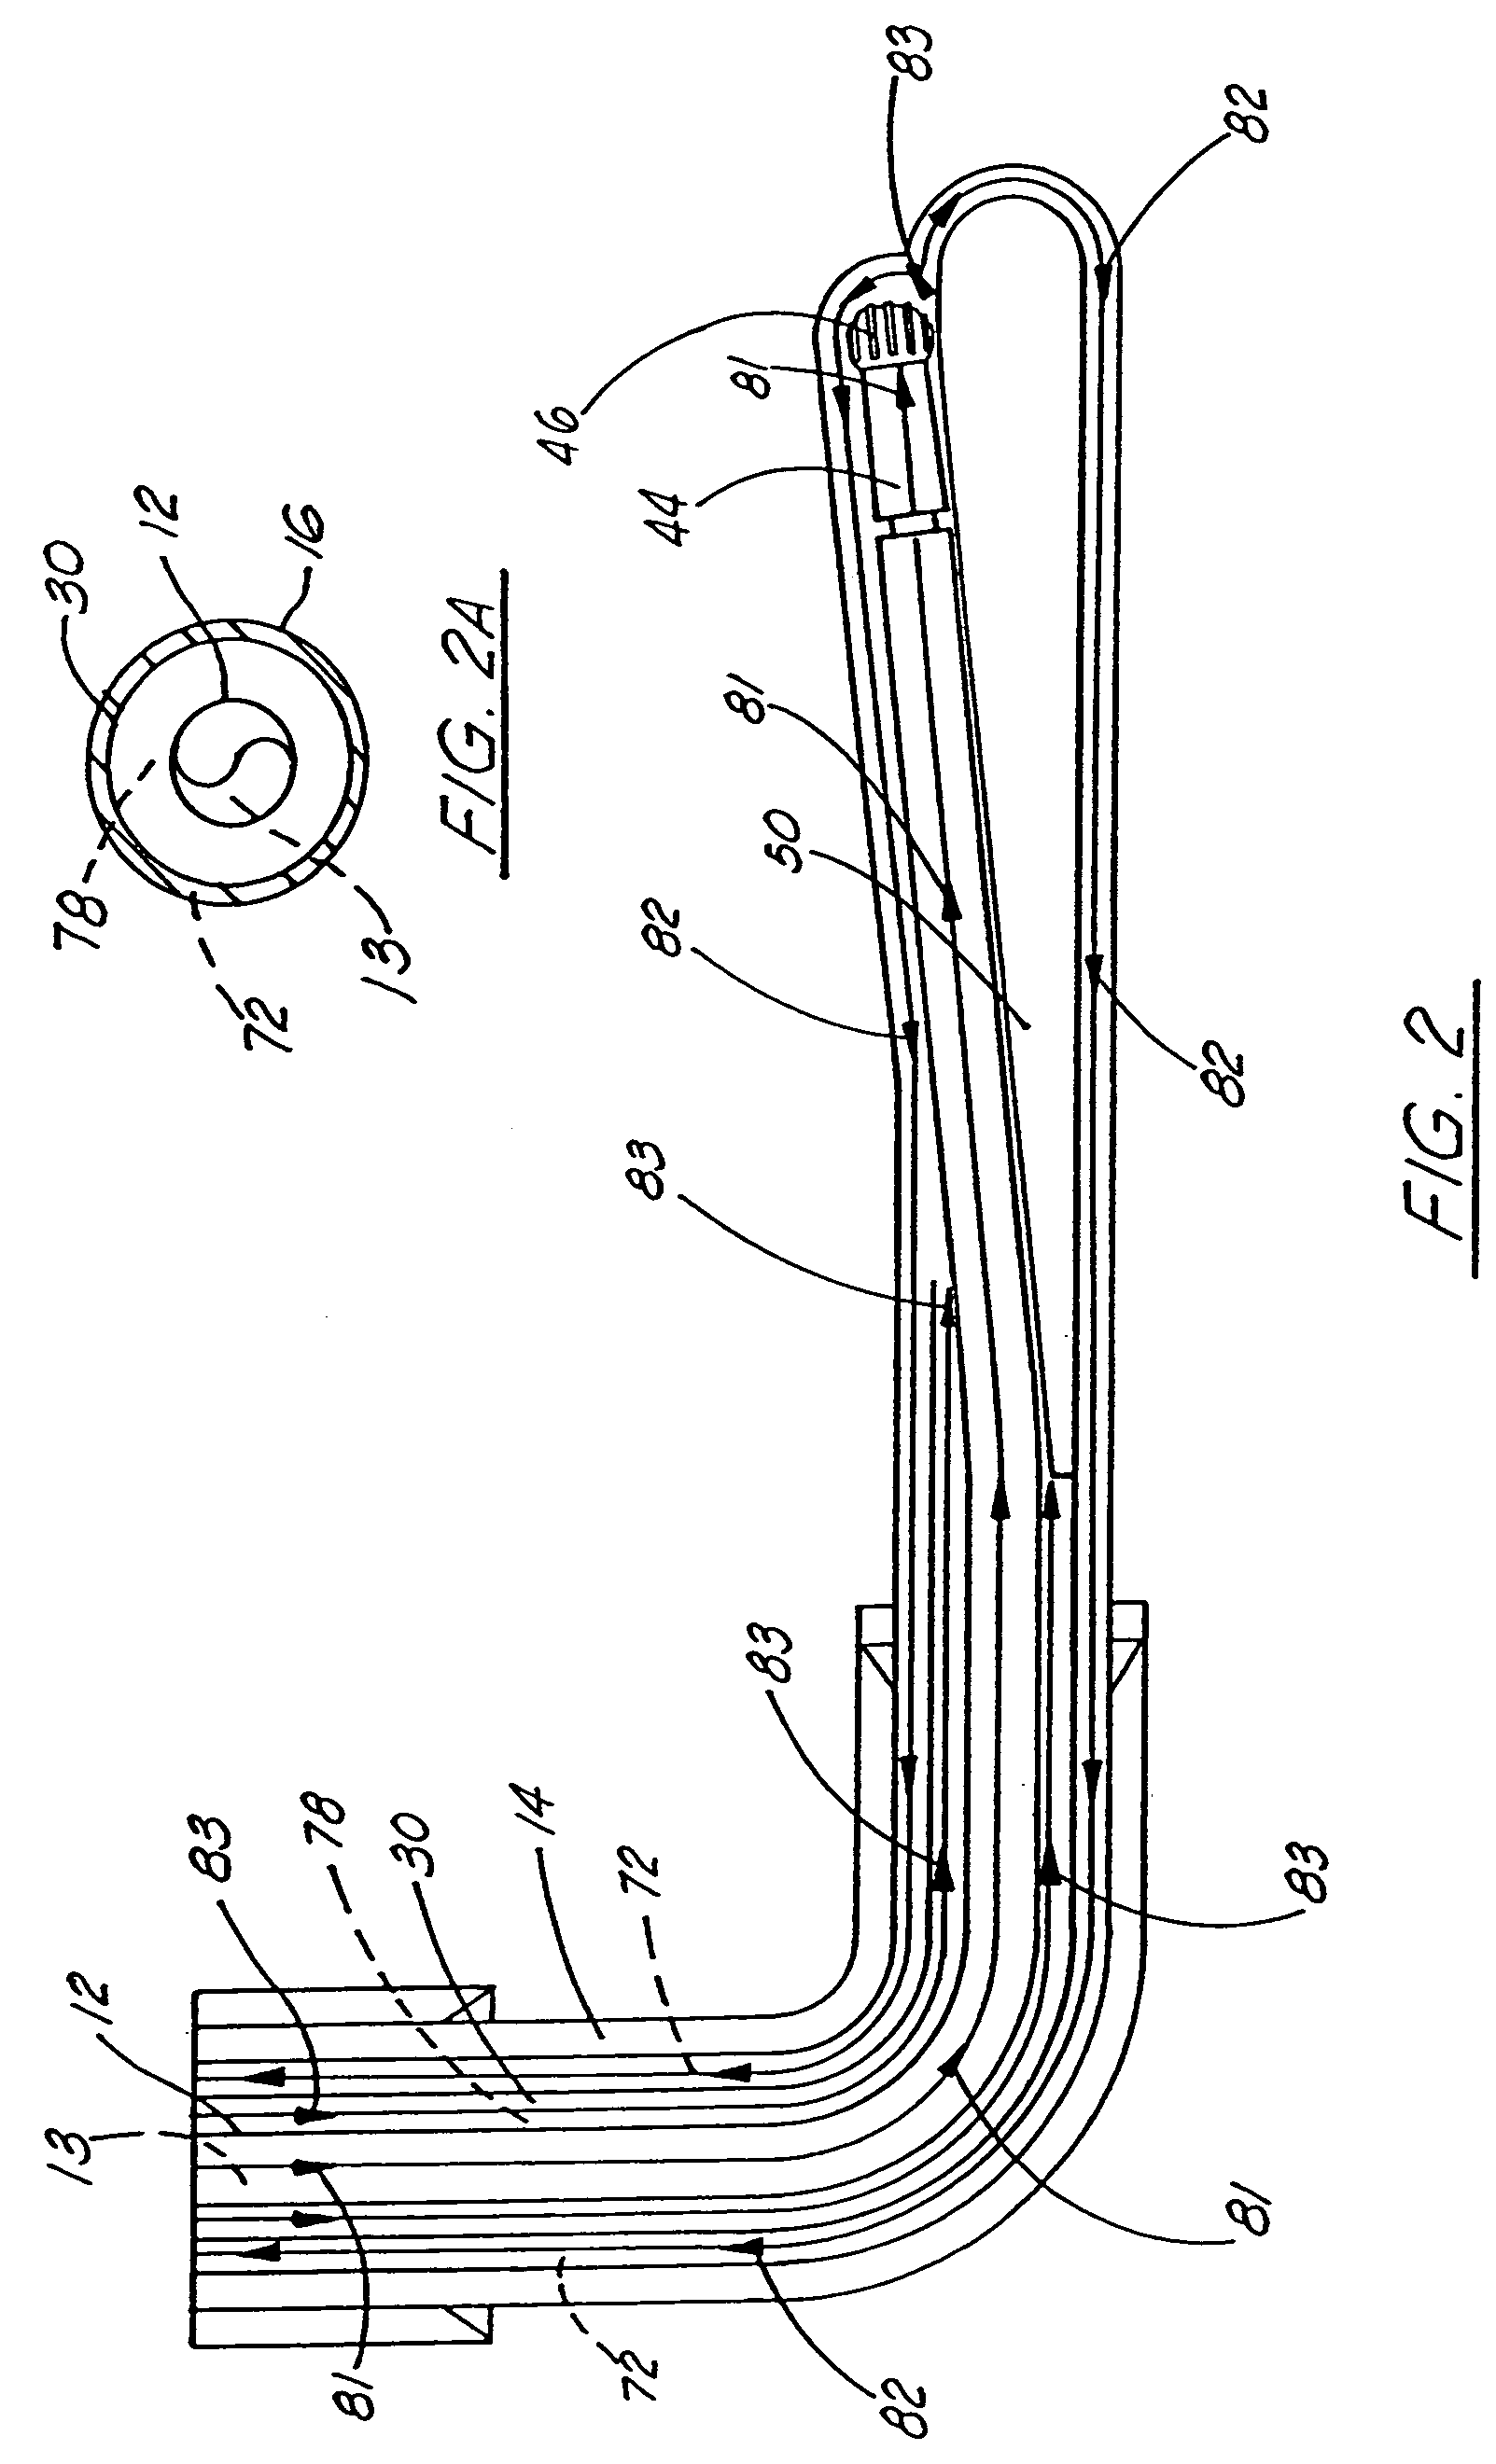 Method and system for hydraulic friction controlled drilling and completing geopressured wells utilizing concentric drill strings